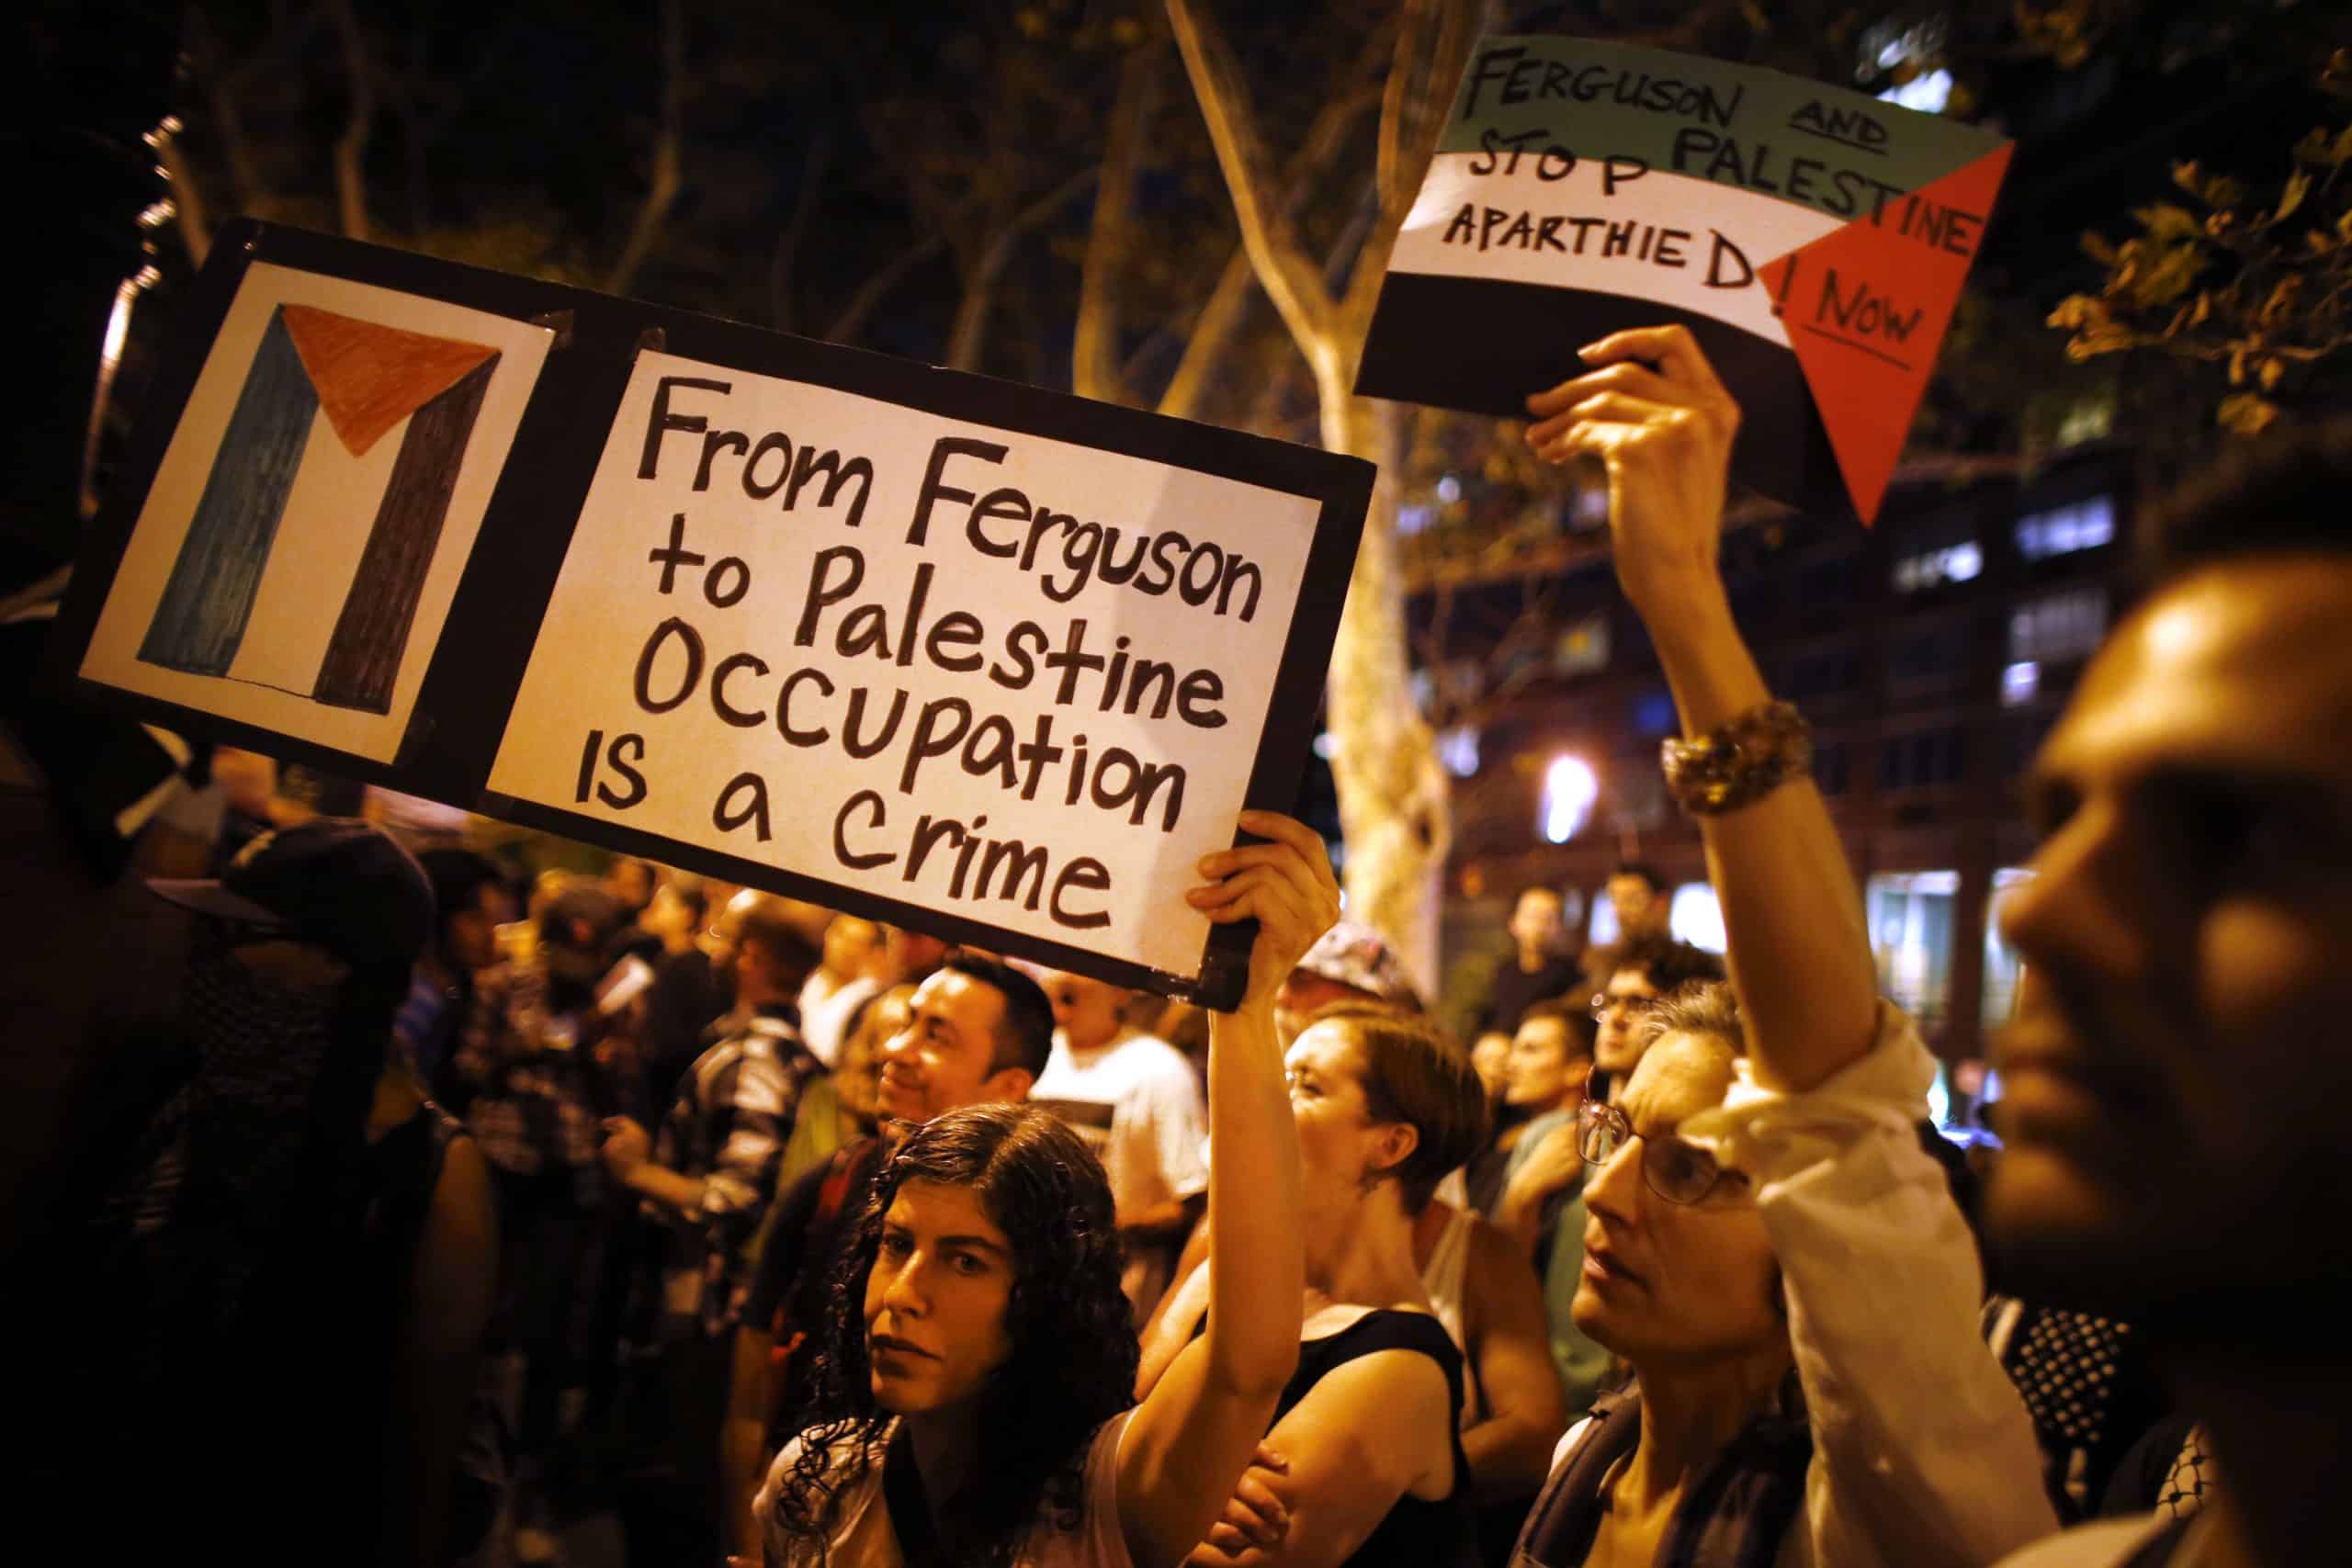 Protesters at an evening protest in NY carry a sign that reads "from ferguson to palestine occupation is a crime"